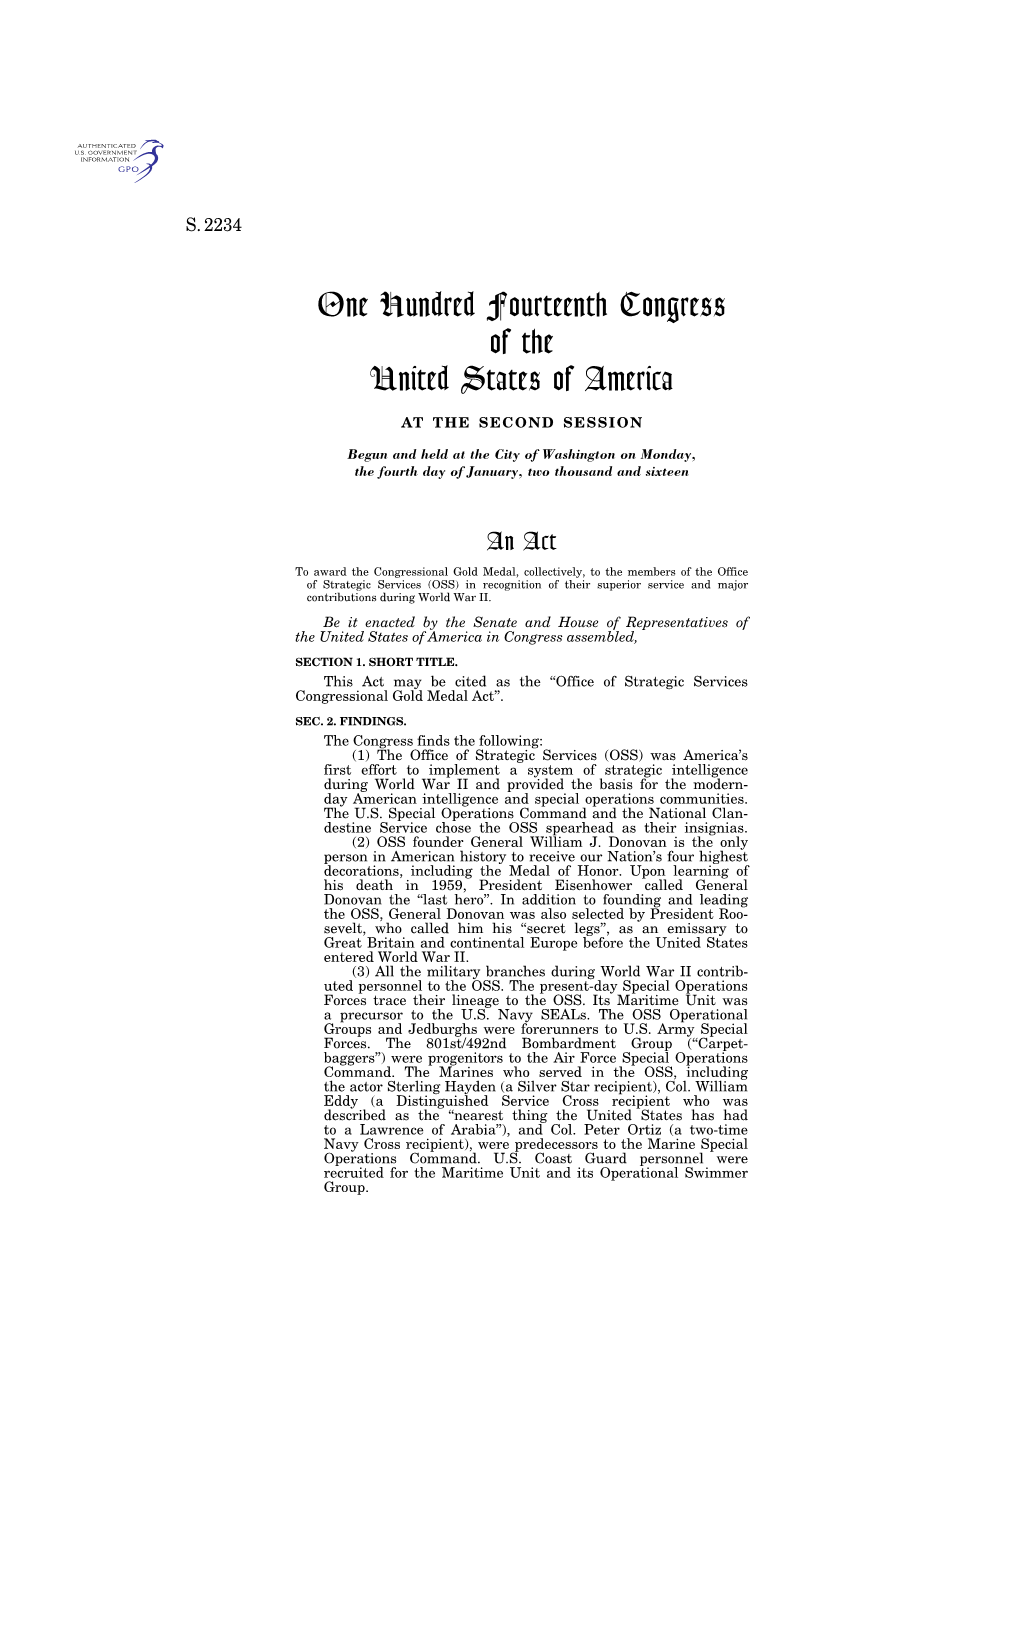 One Hundred Fourteenth Congress of the United States of America